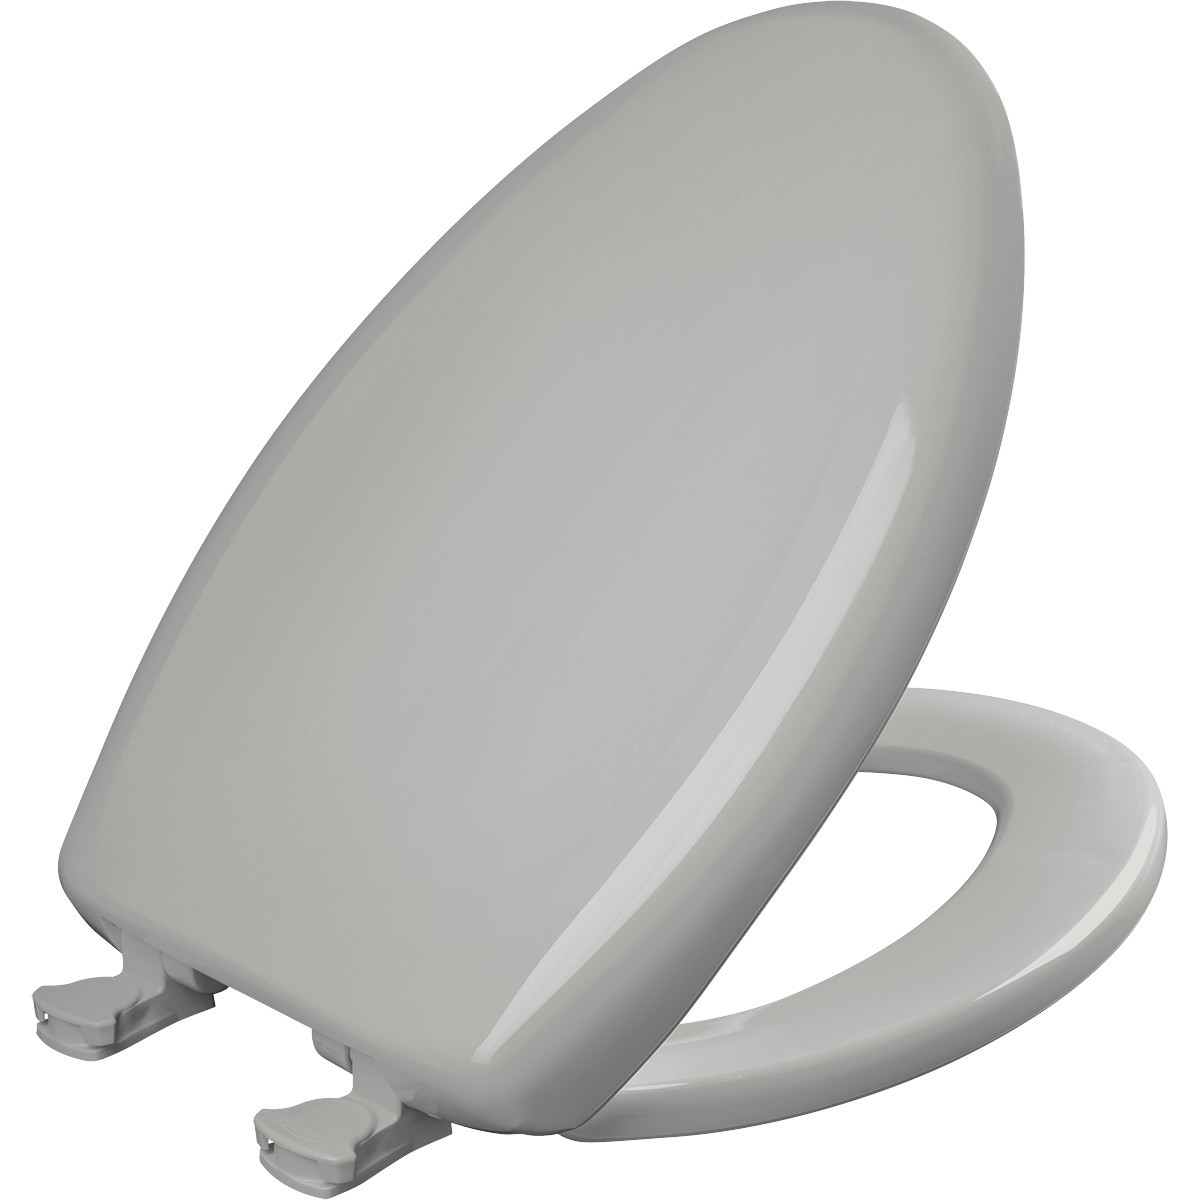 Bemis 1200SLOWT 162 Elongated Plastic Toilet Seat in Silver with STA-TITE Seat Fastening System EasyClean and WhisperClose Hinge